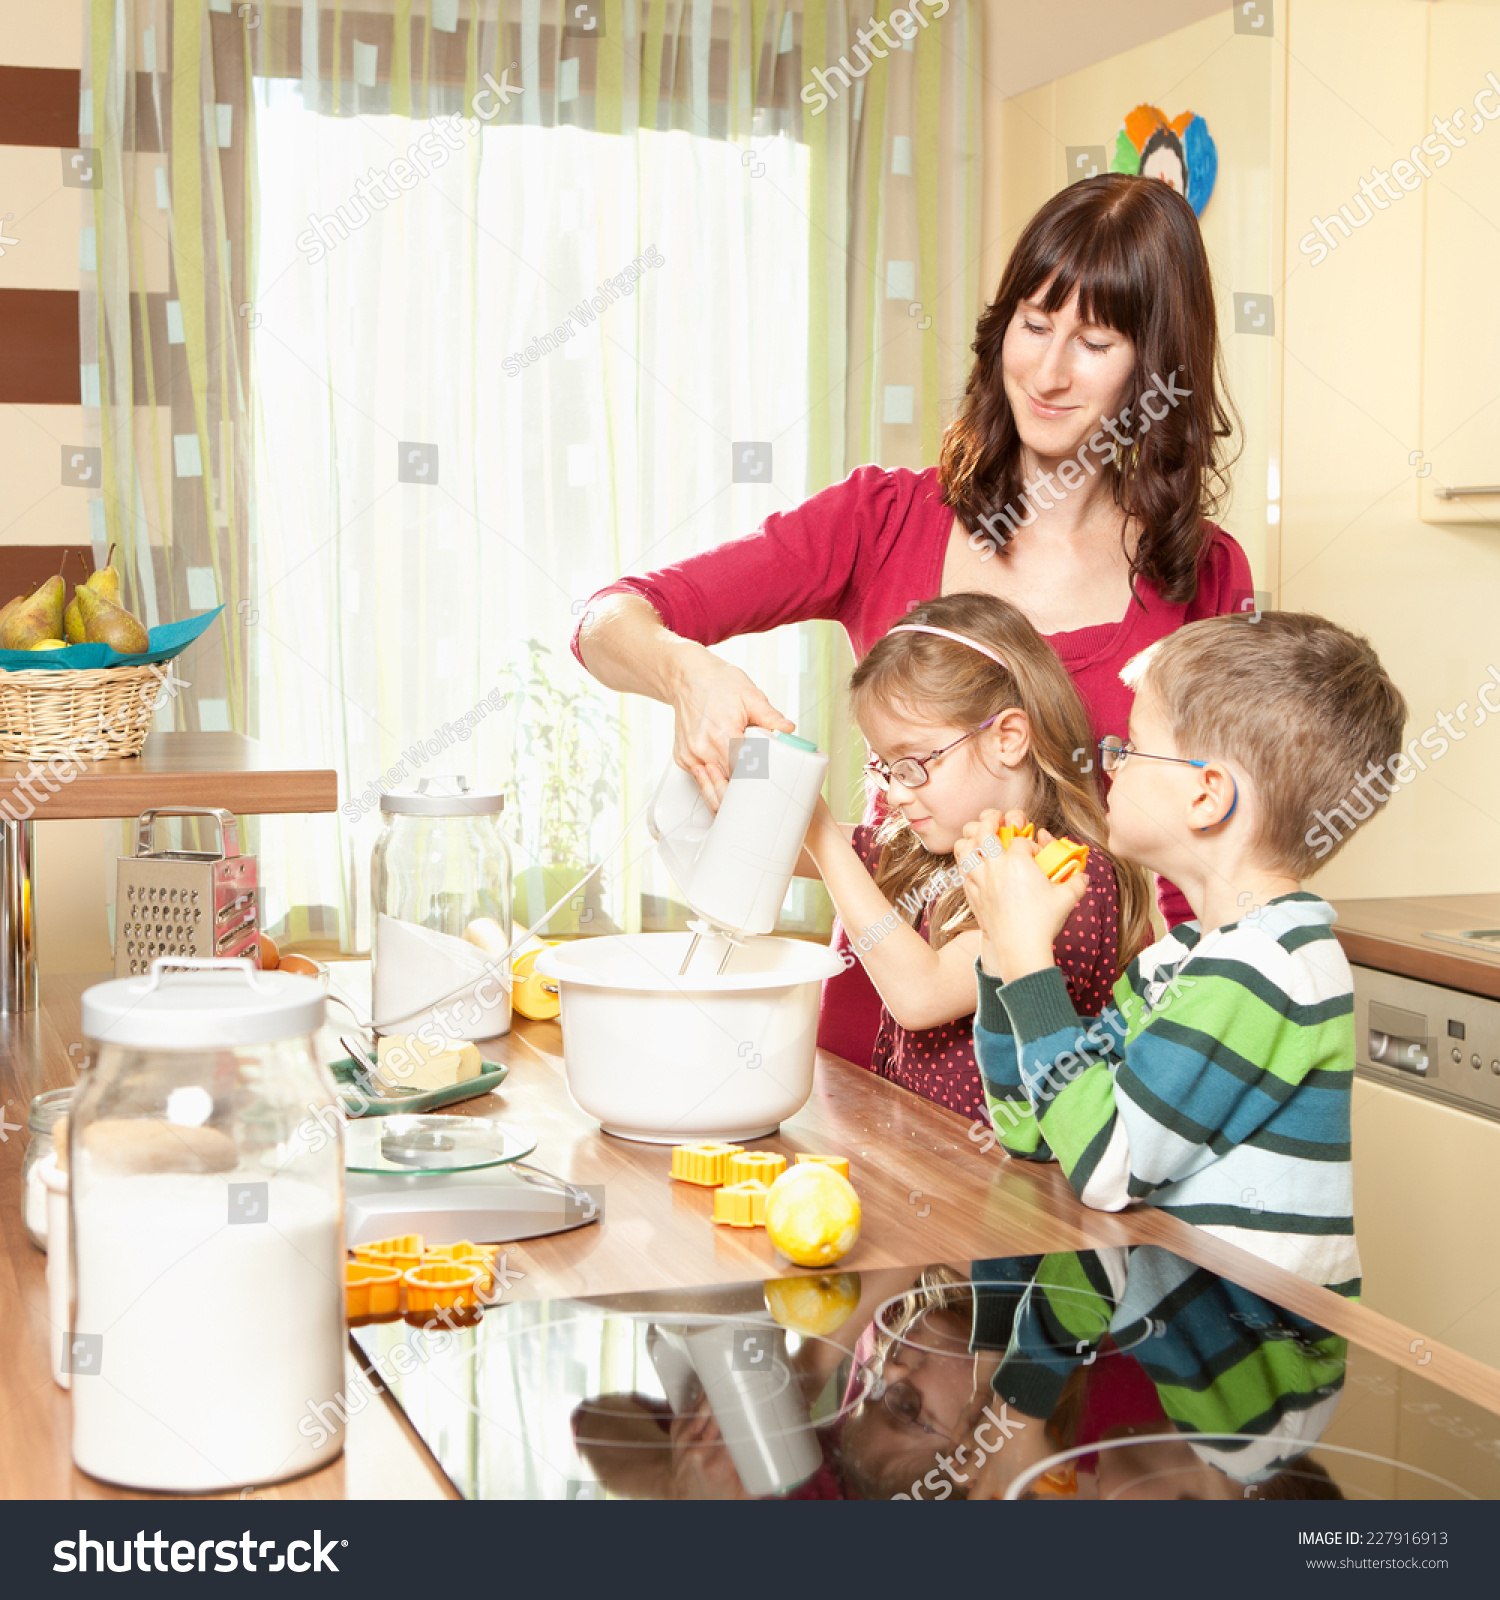 Young Family Baking In The Kitchen Stock Photo 227916913 : Shutterstock